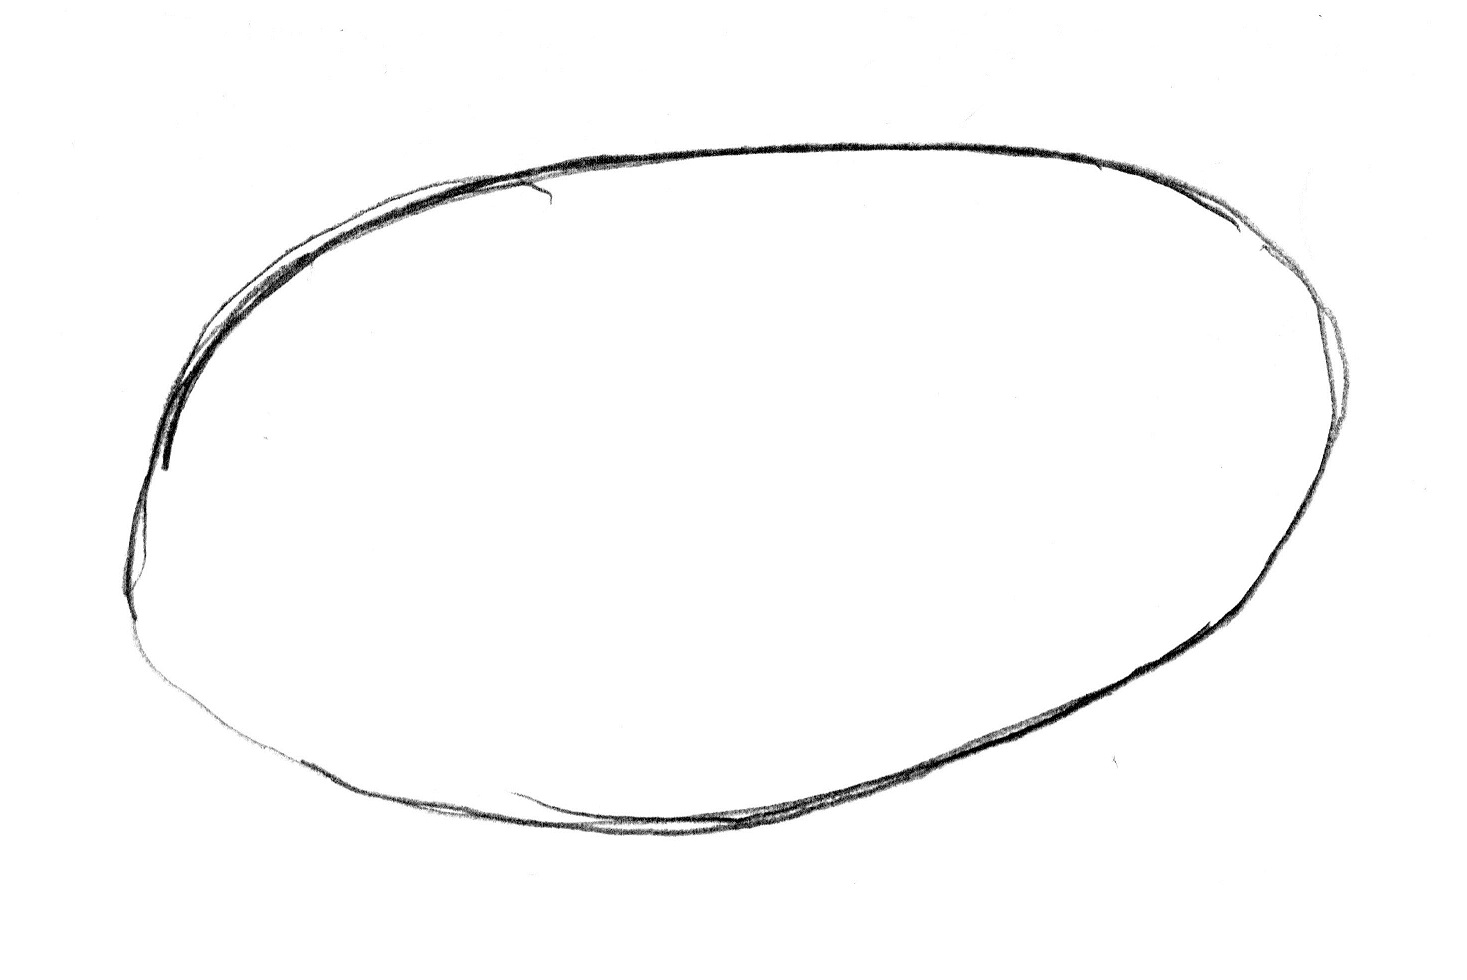 Drawn shapes oval.